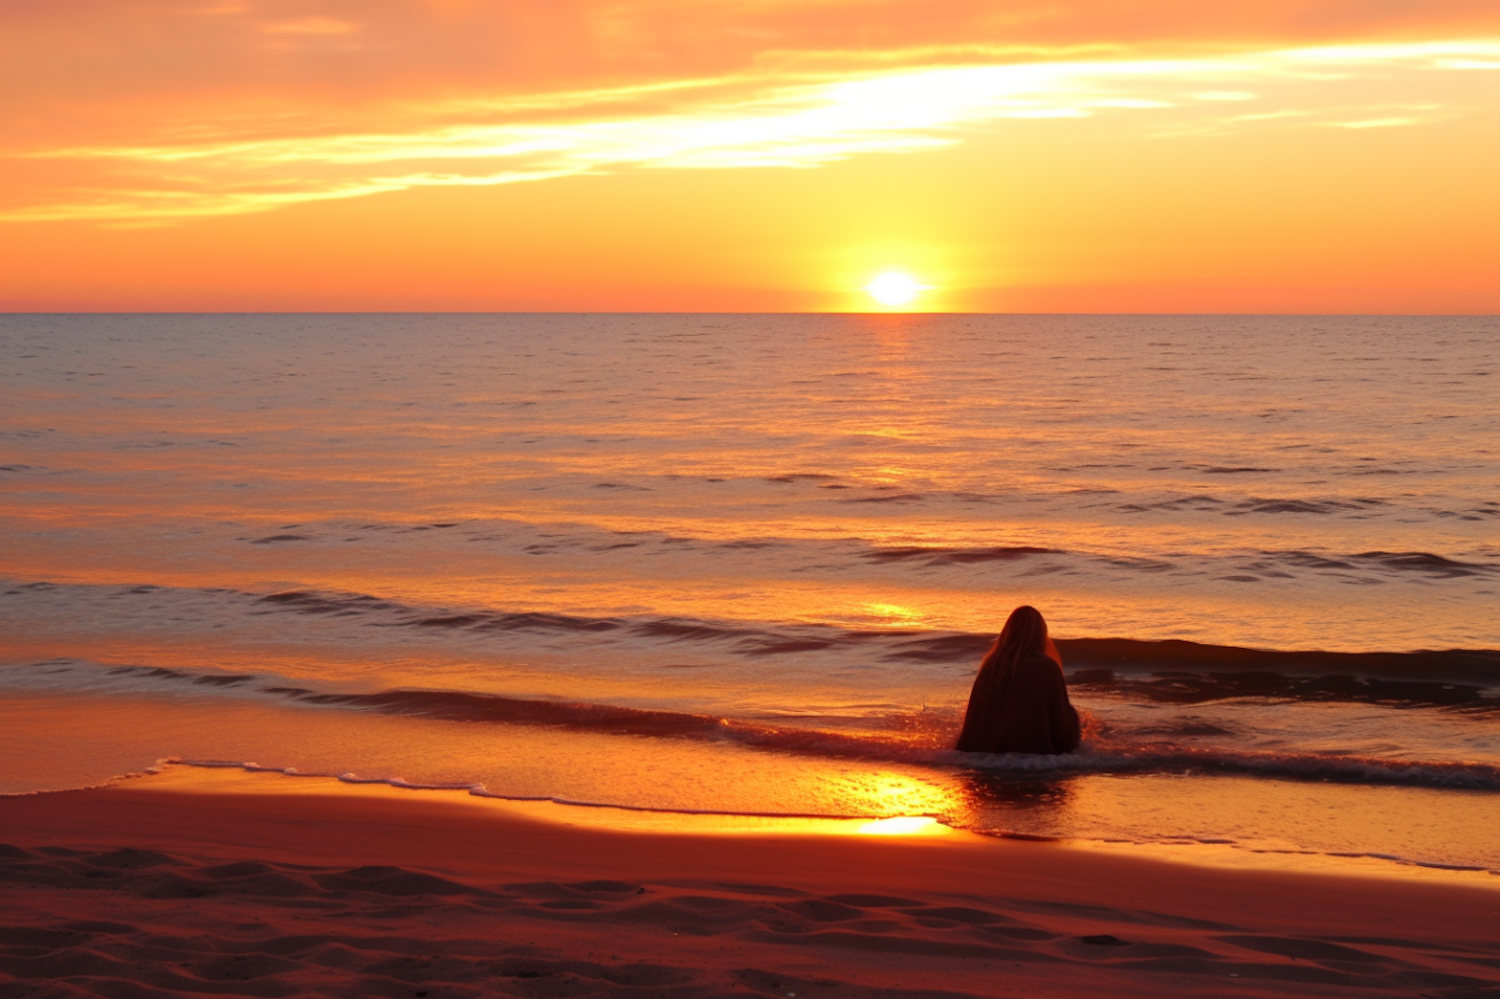 Solitary Contemplation at Golden Sunset